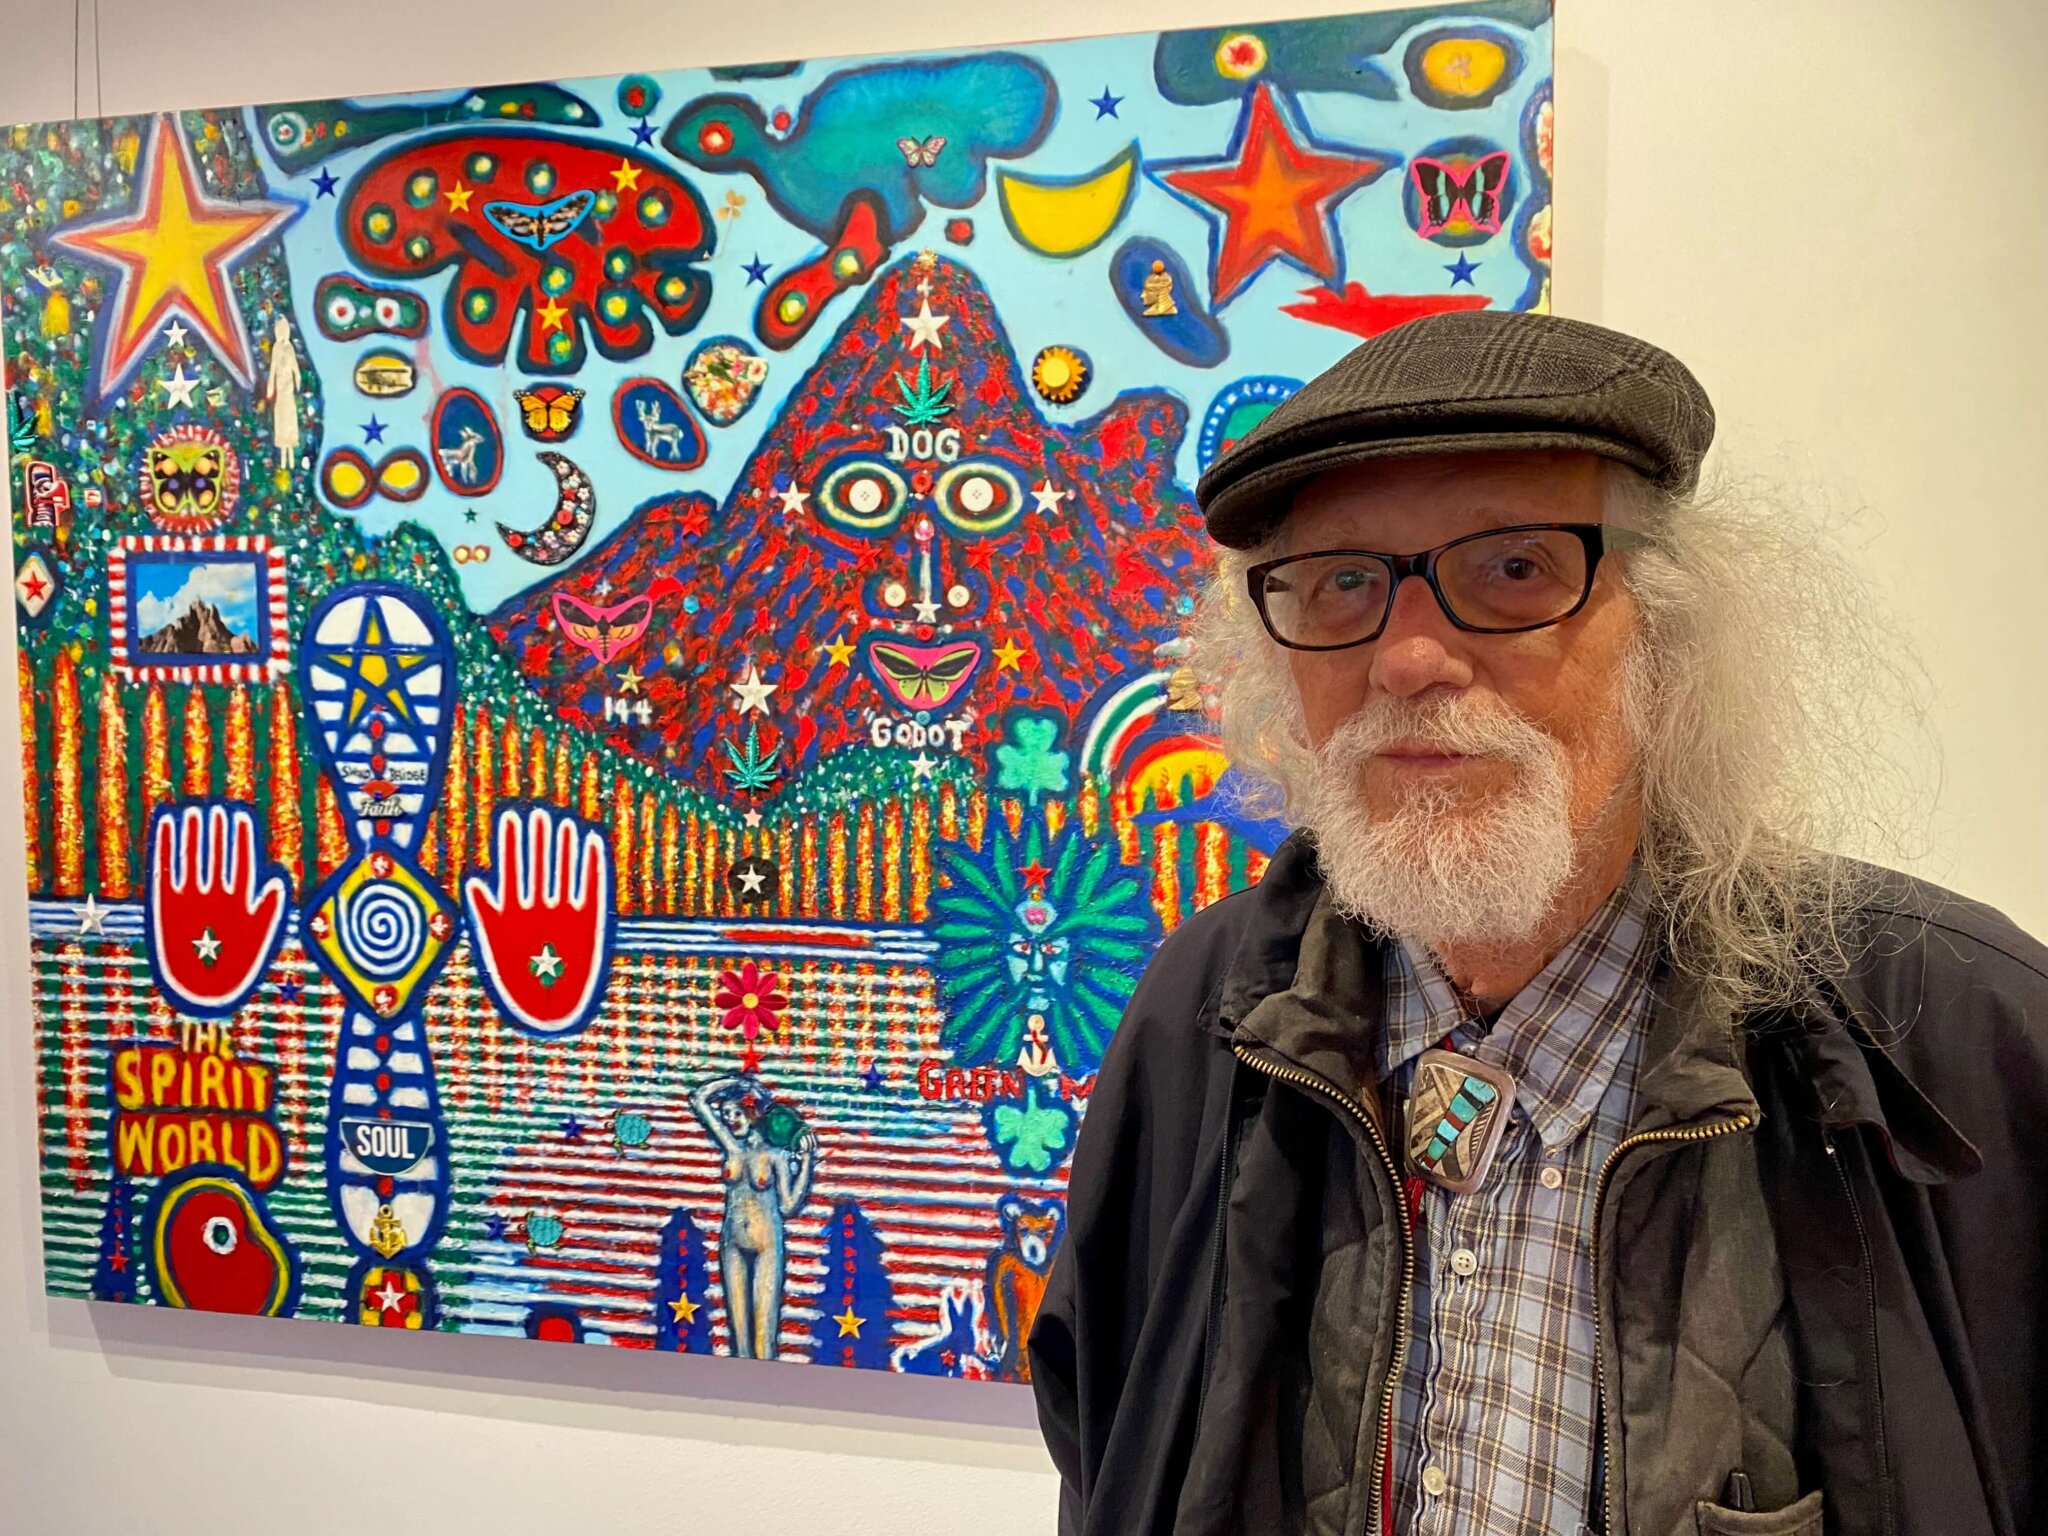 David Slater with his "Spirit World" painting at MM Fine Art